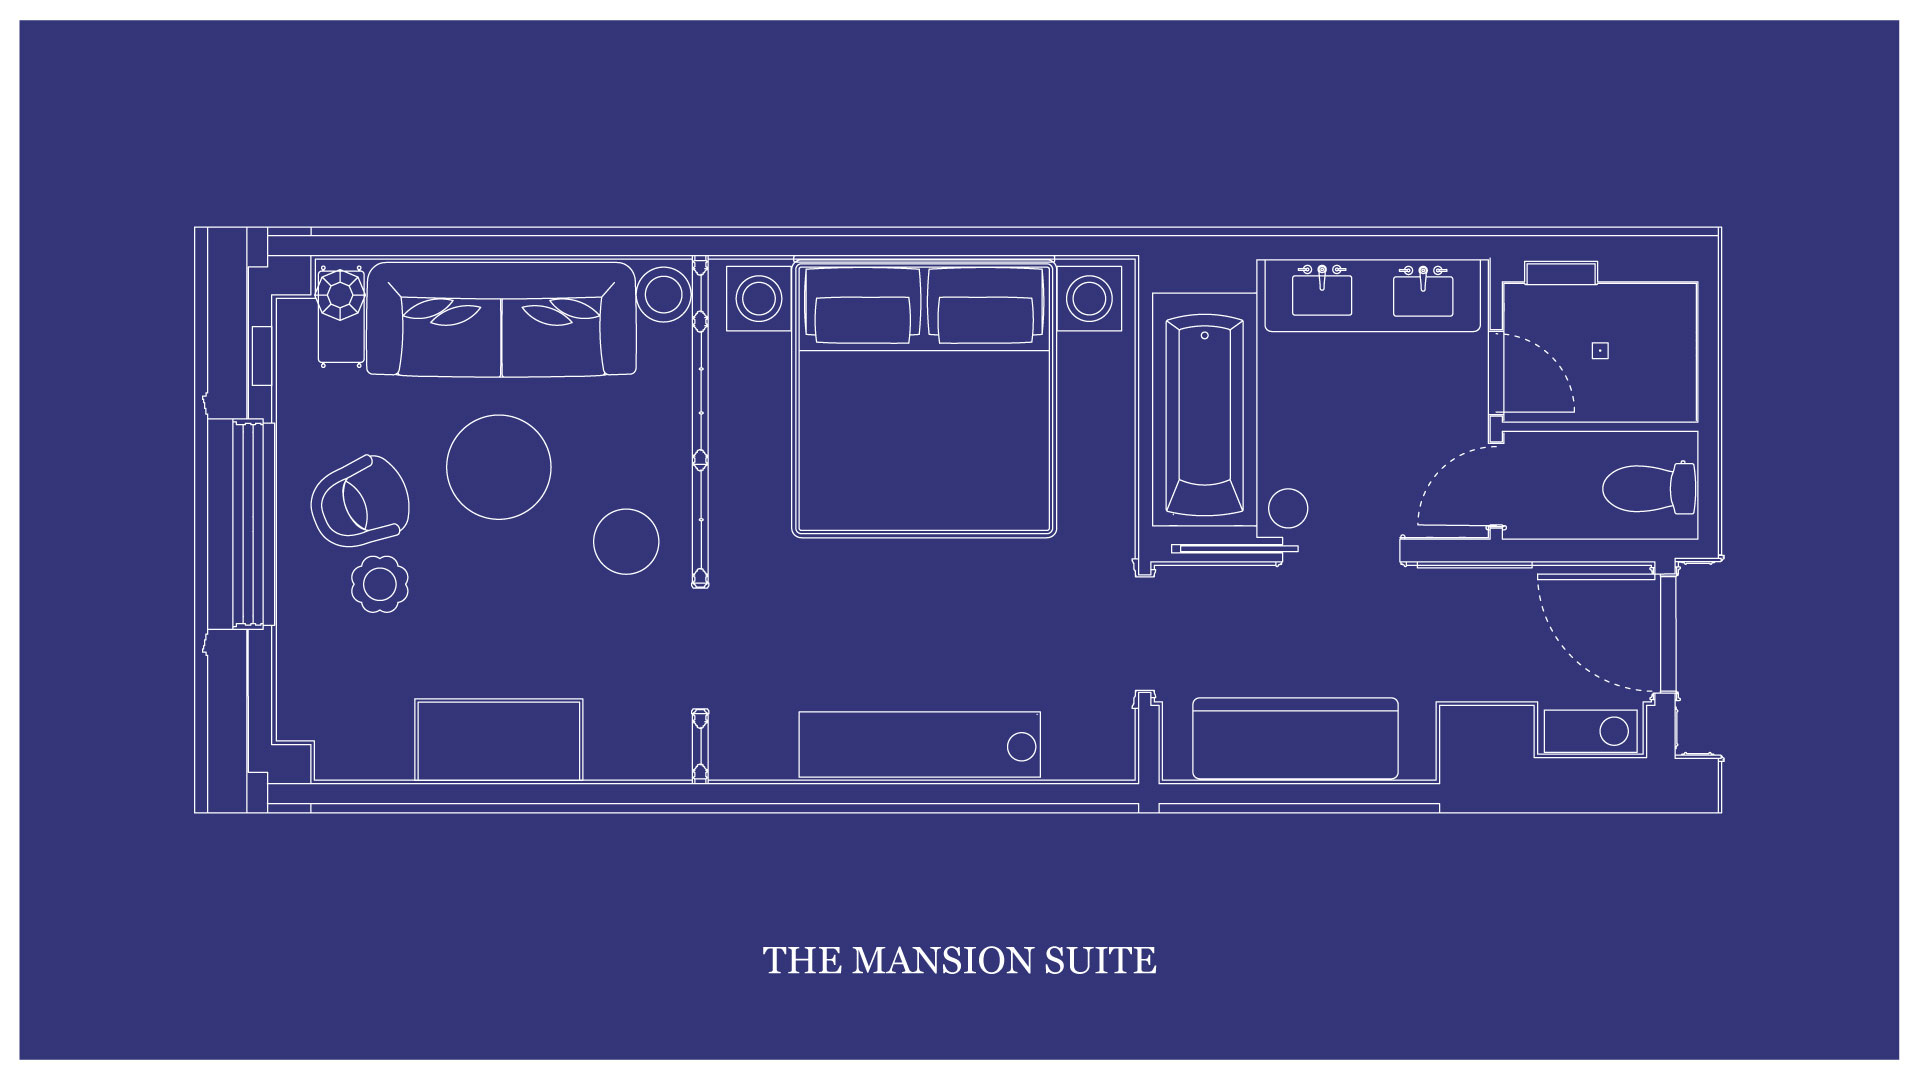 Well designed blueprint of the suite in the Mansion